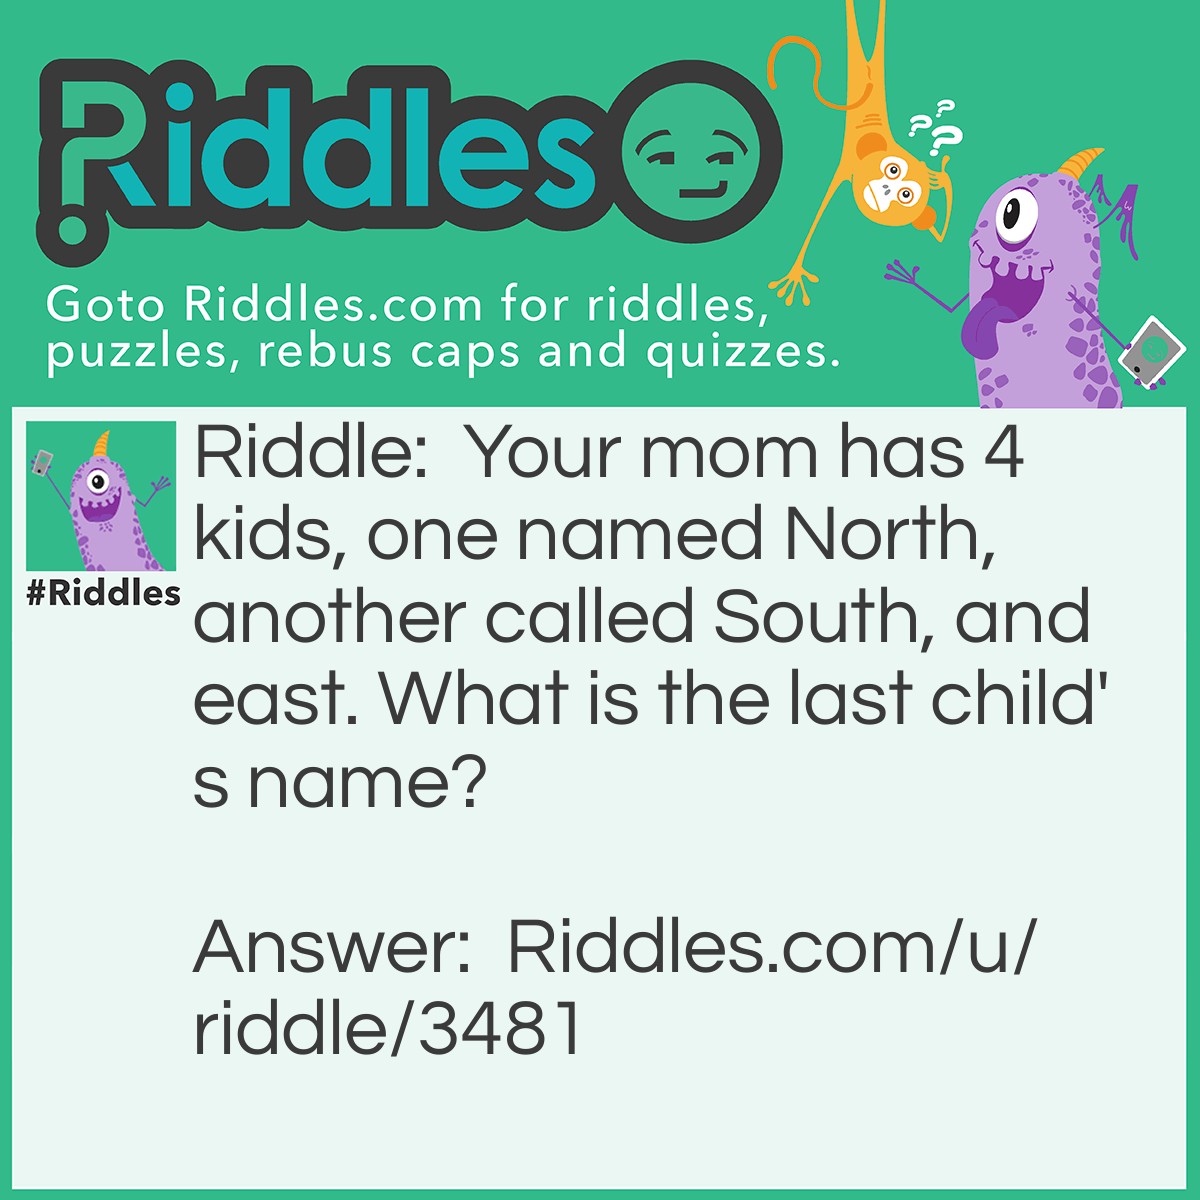 Riddle: Your mom has 4 kids, one named North, another called South, and East. What is the last child's name? Answer: Your own name, it's your mom, your part of the 4 children!